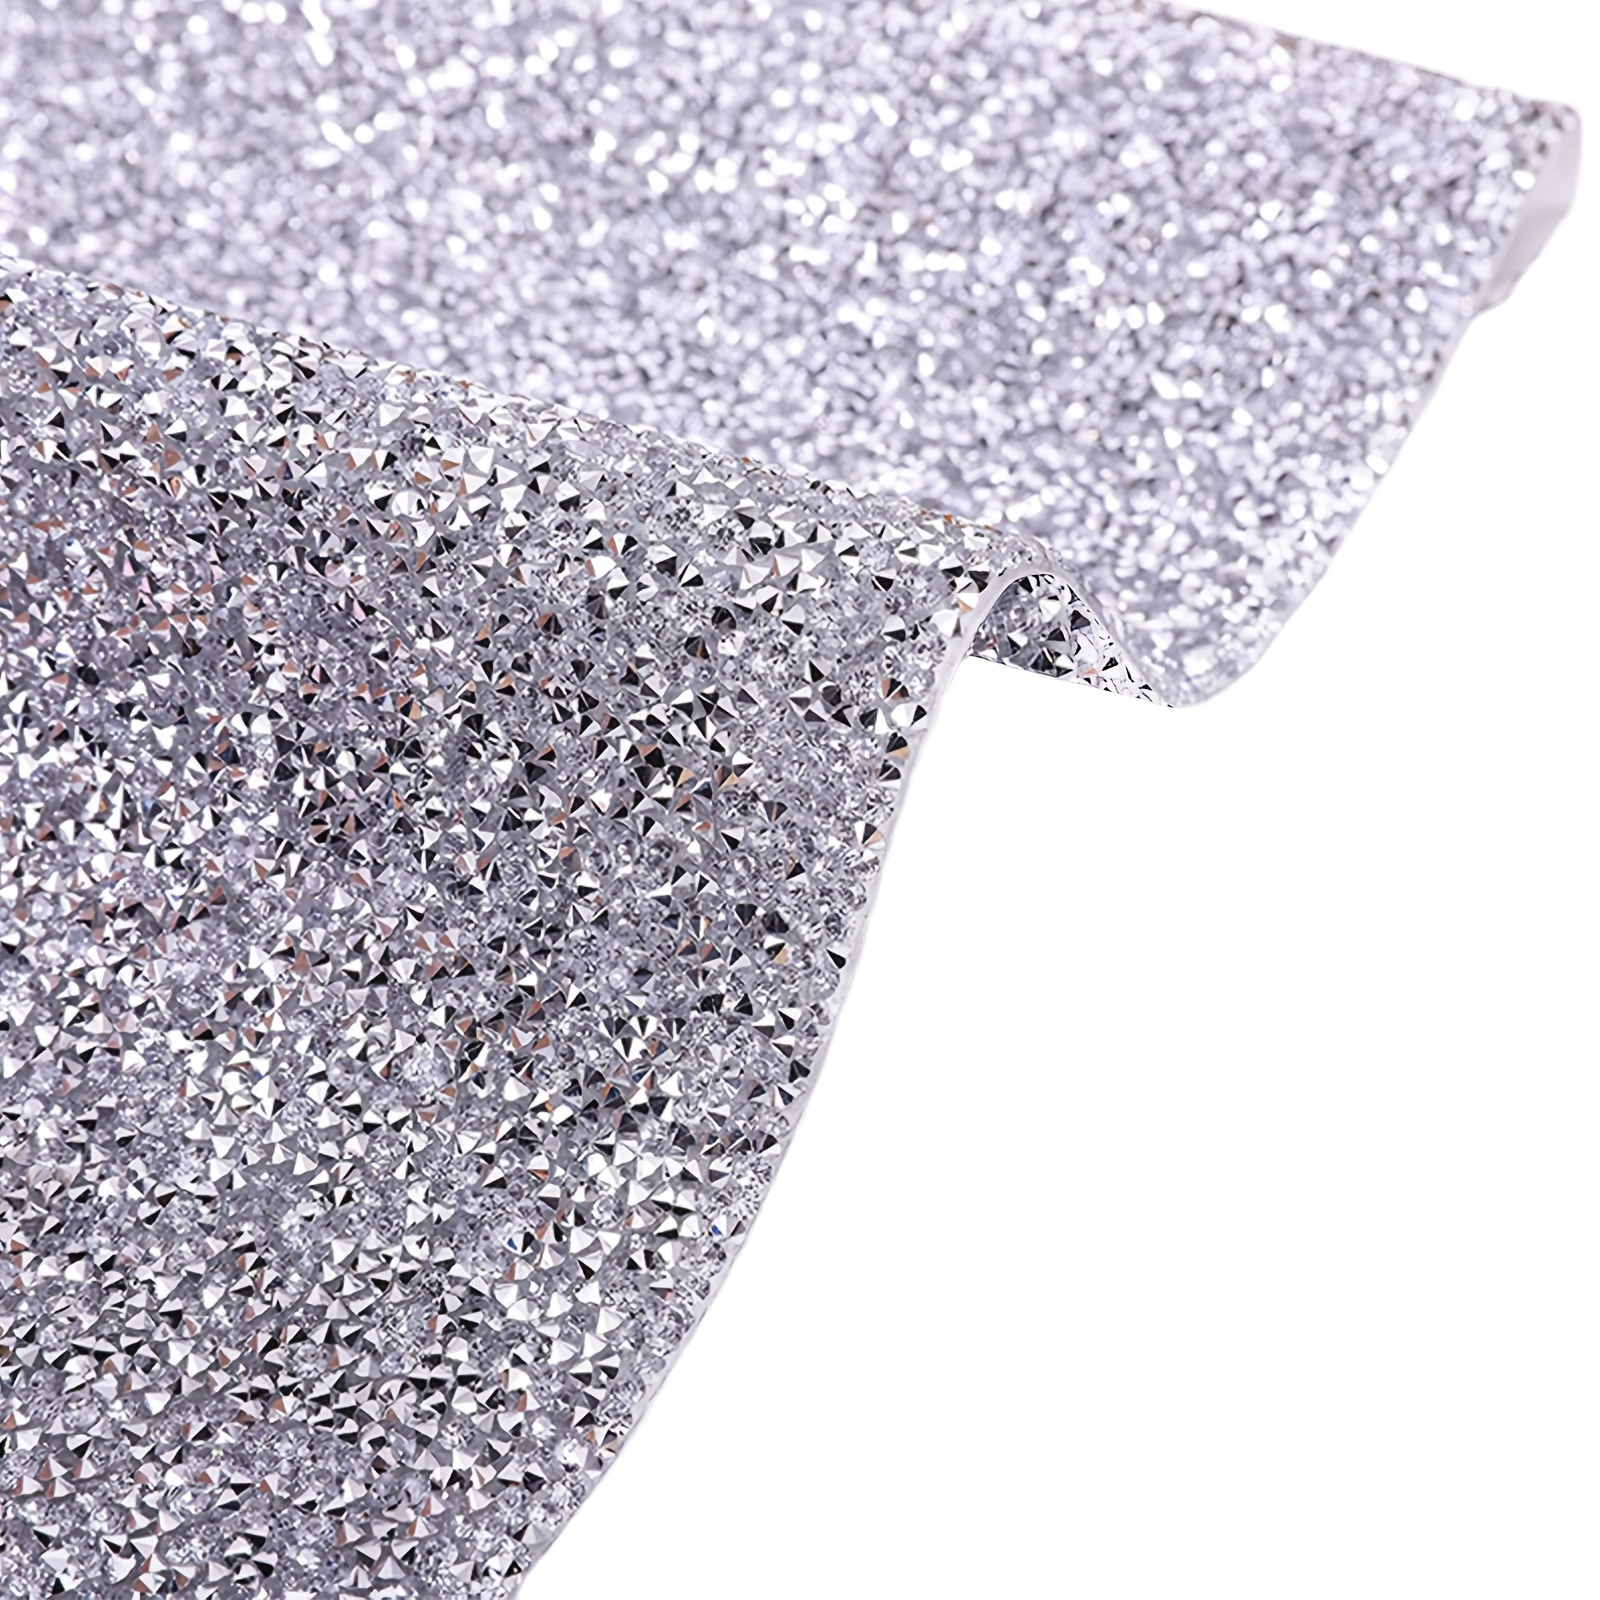 Zonon 60000 Pieces Rhinestone Sheets Stickers Self Adhesive Bling Crystal  DIY Glitter Car Decorations Resin Stickers for Car Cellphone Crafts